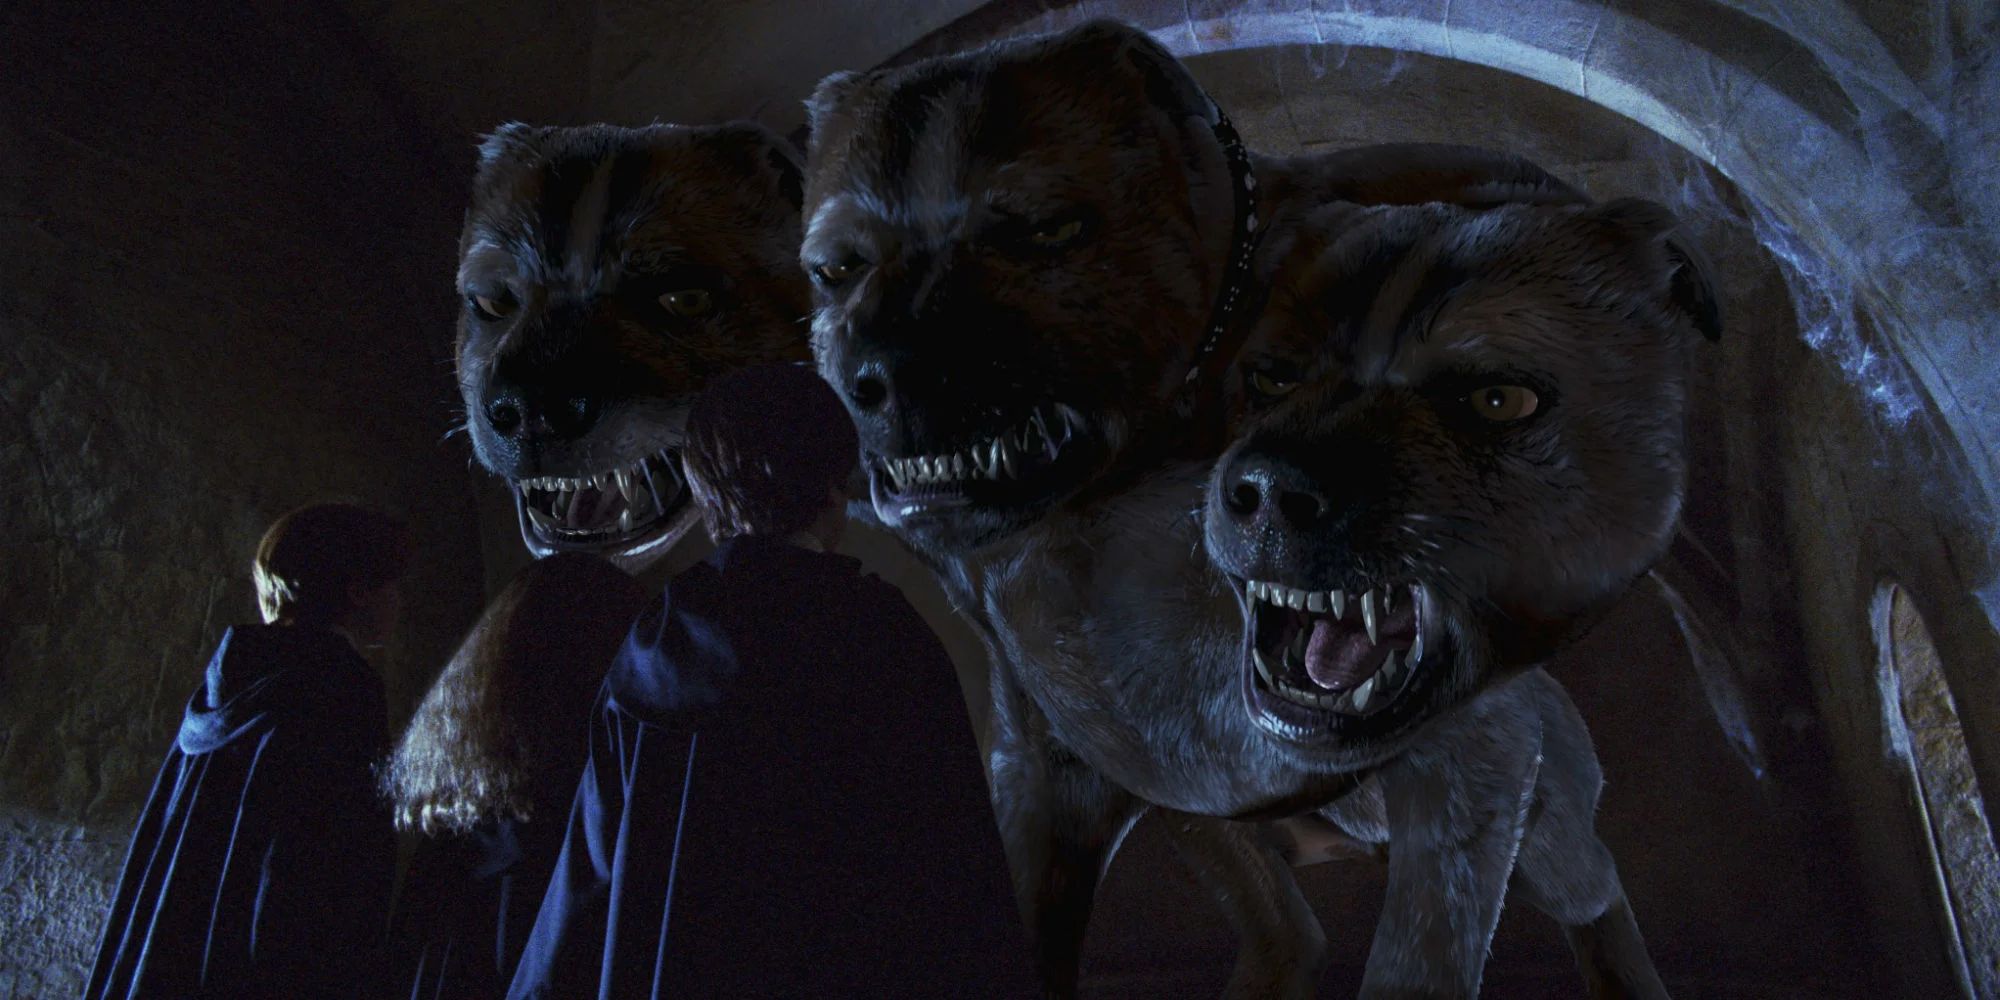 Fluffy the three-headed dog towers above Harry, Ron and Hermione in the Sorcerer's Stone film